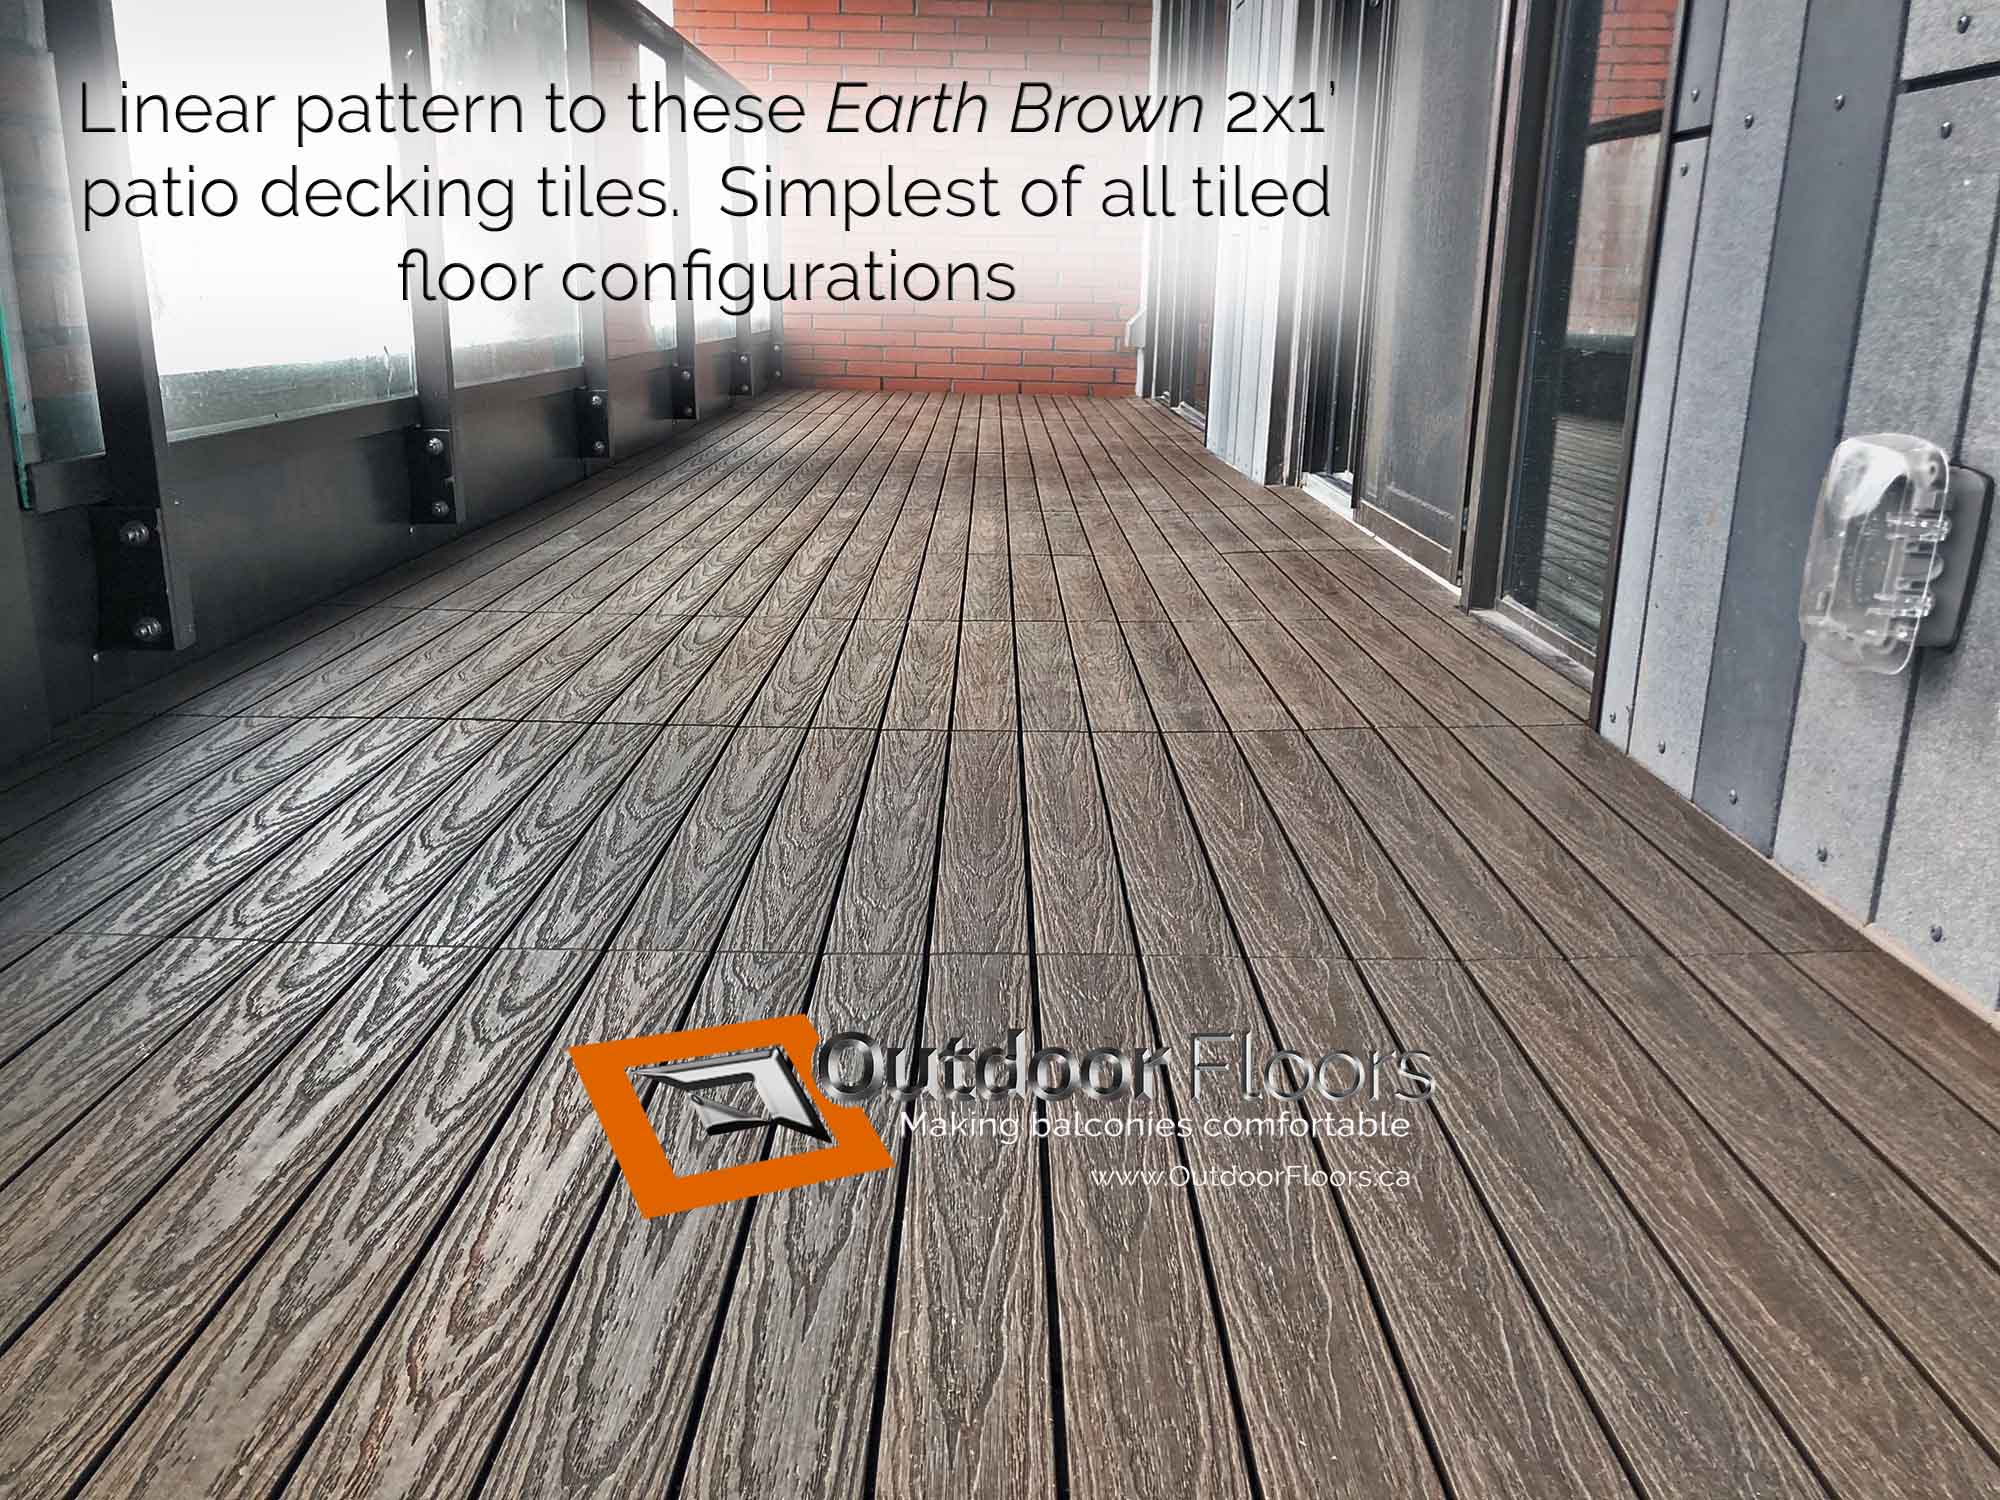 Earth Brown- linear pattern is simplest of all balcony flooring